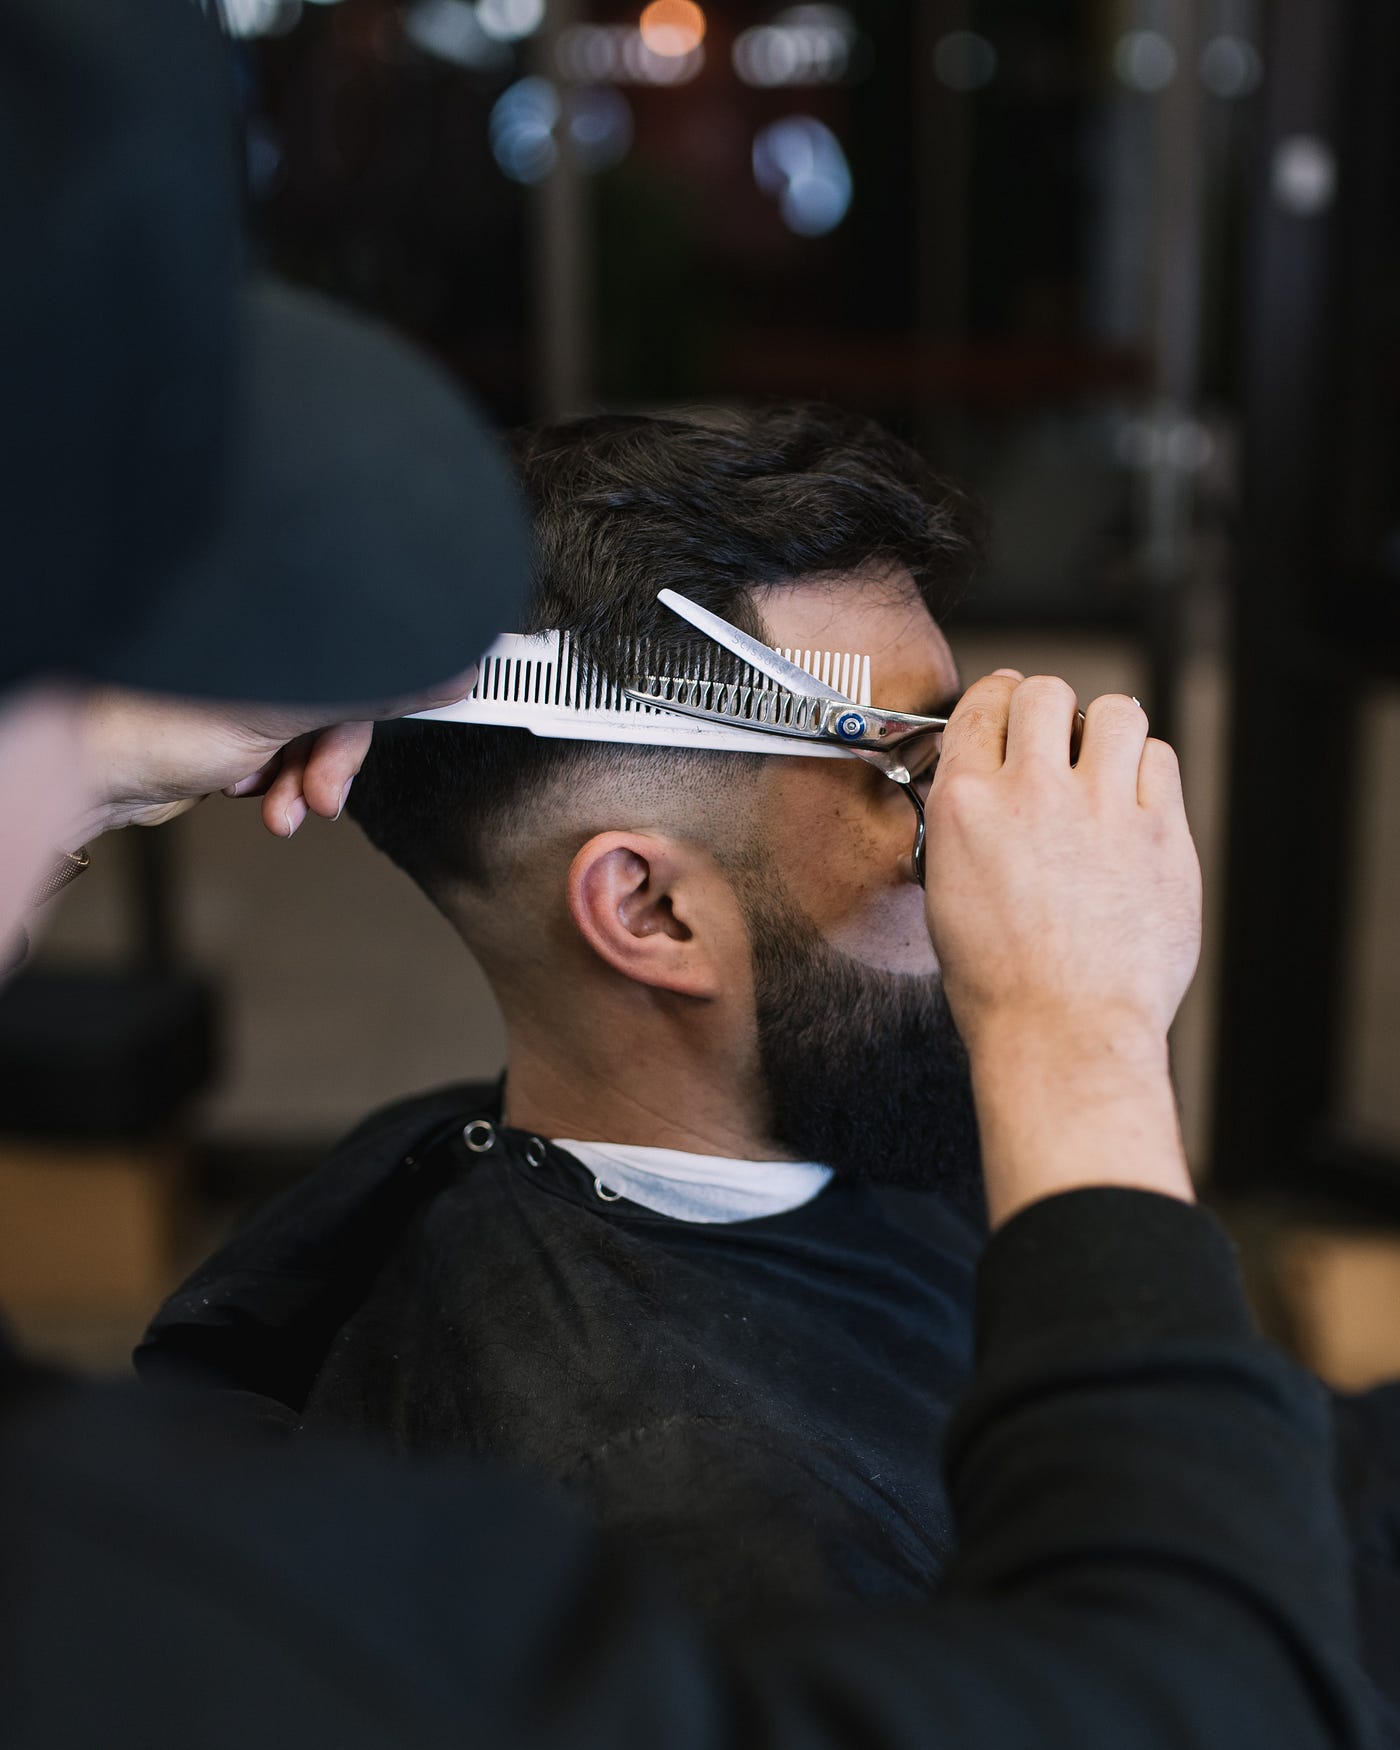 10 Must-see tutorials every barber needs, by TheConsciousBarber